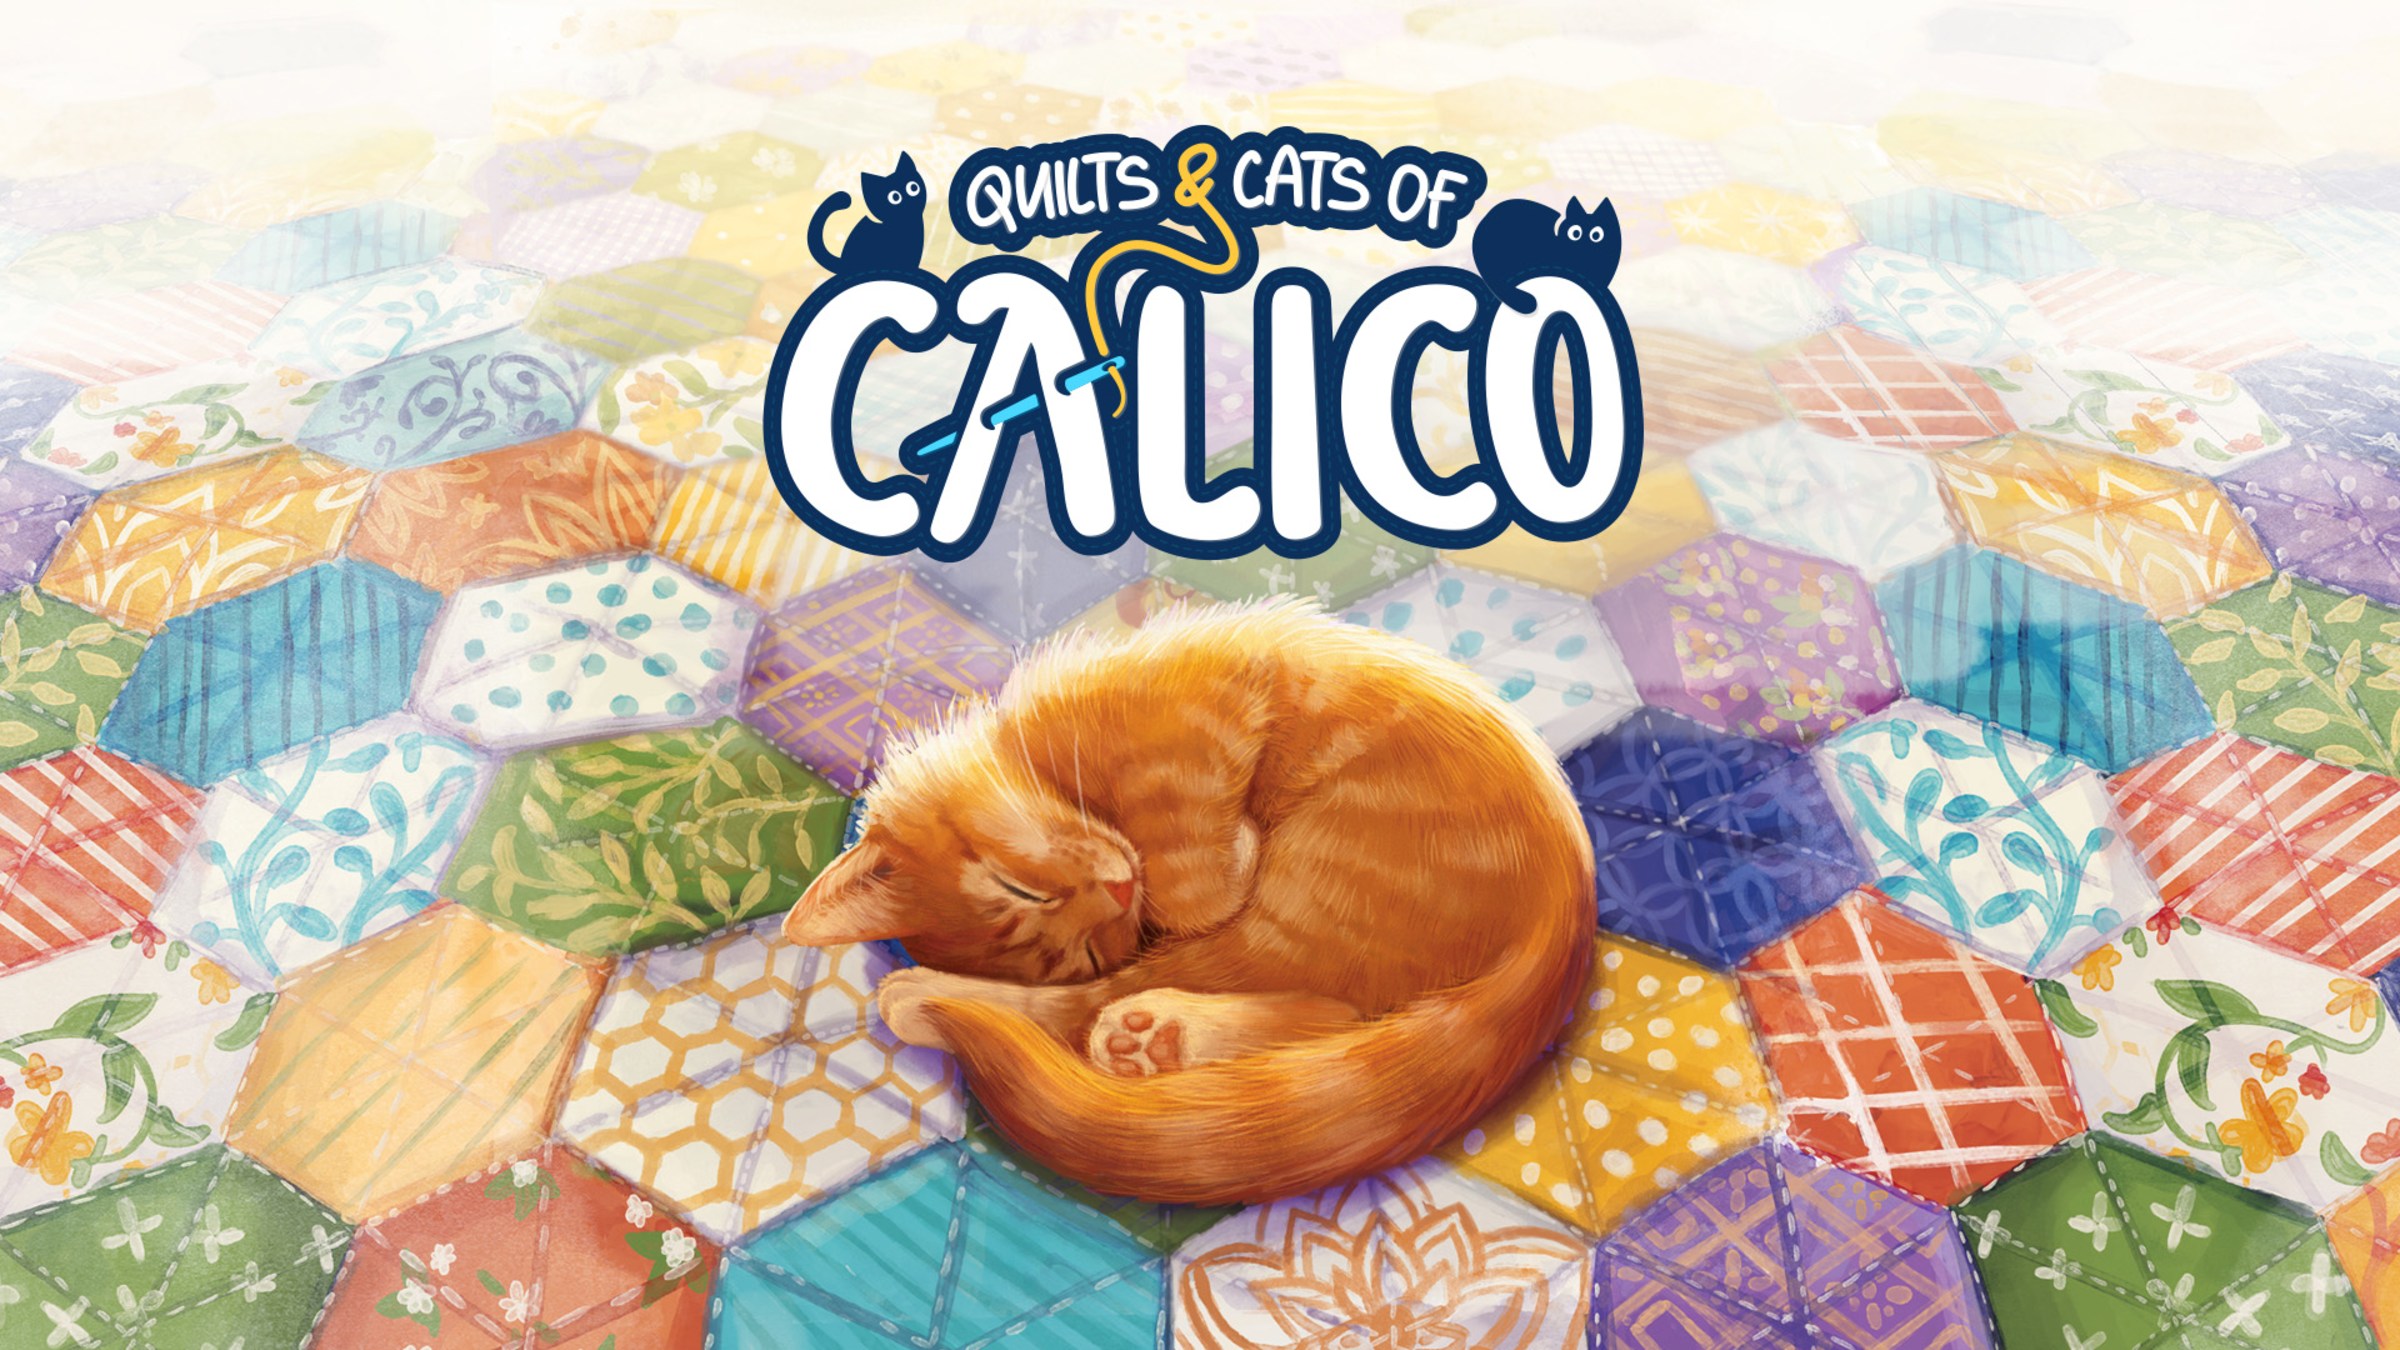 Quilts and Cats of Calico PS4 Version Full Game Setup Free Download